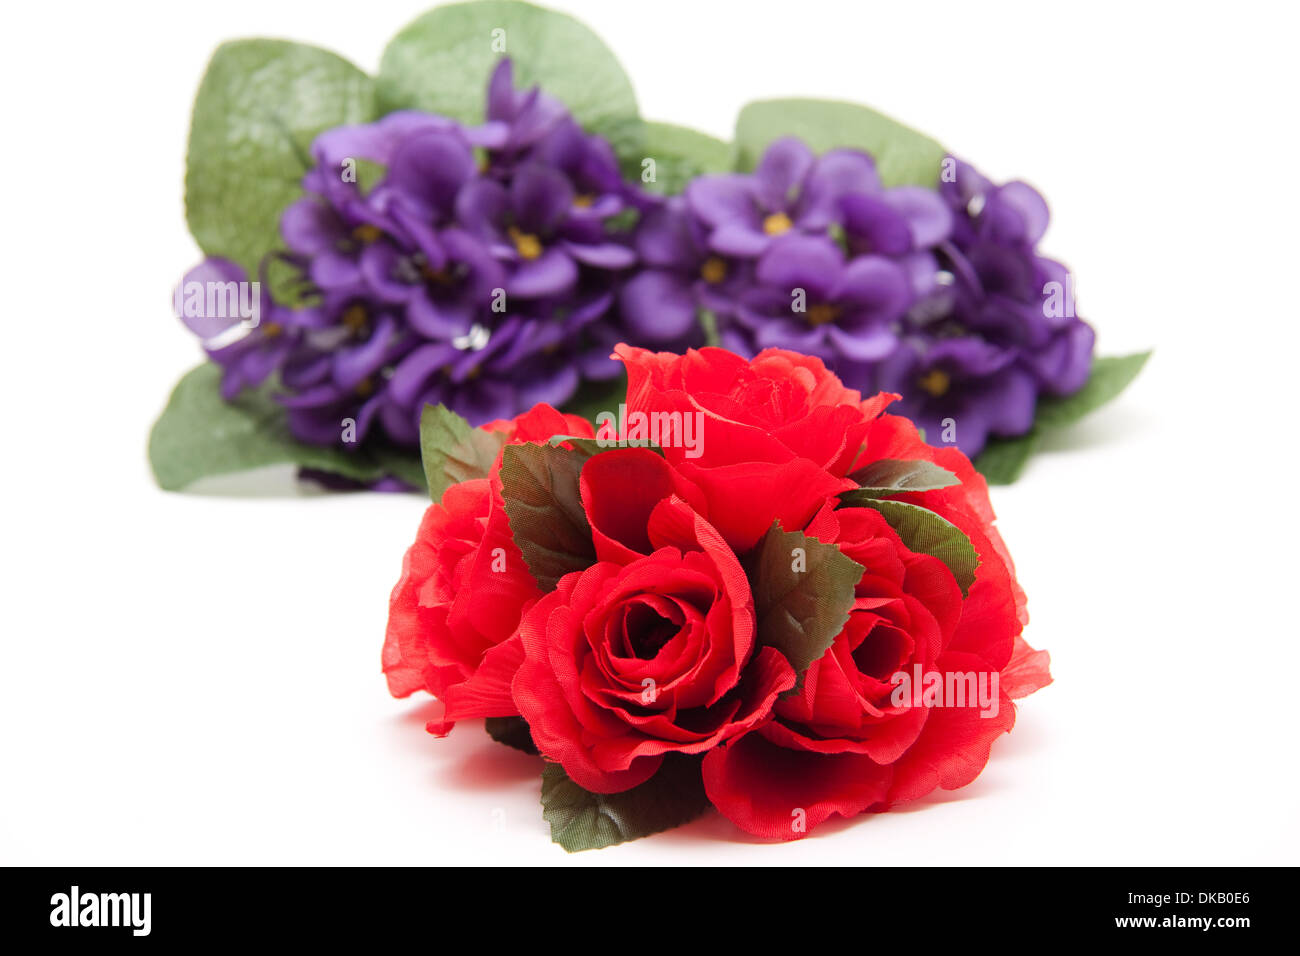 Roses and violets Stock Photo - Alamy